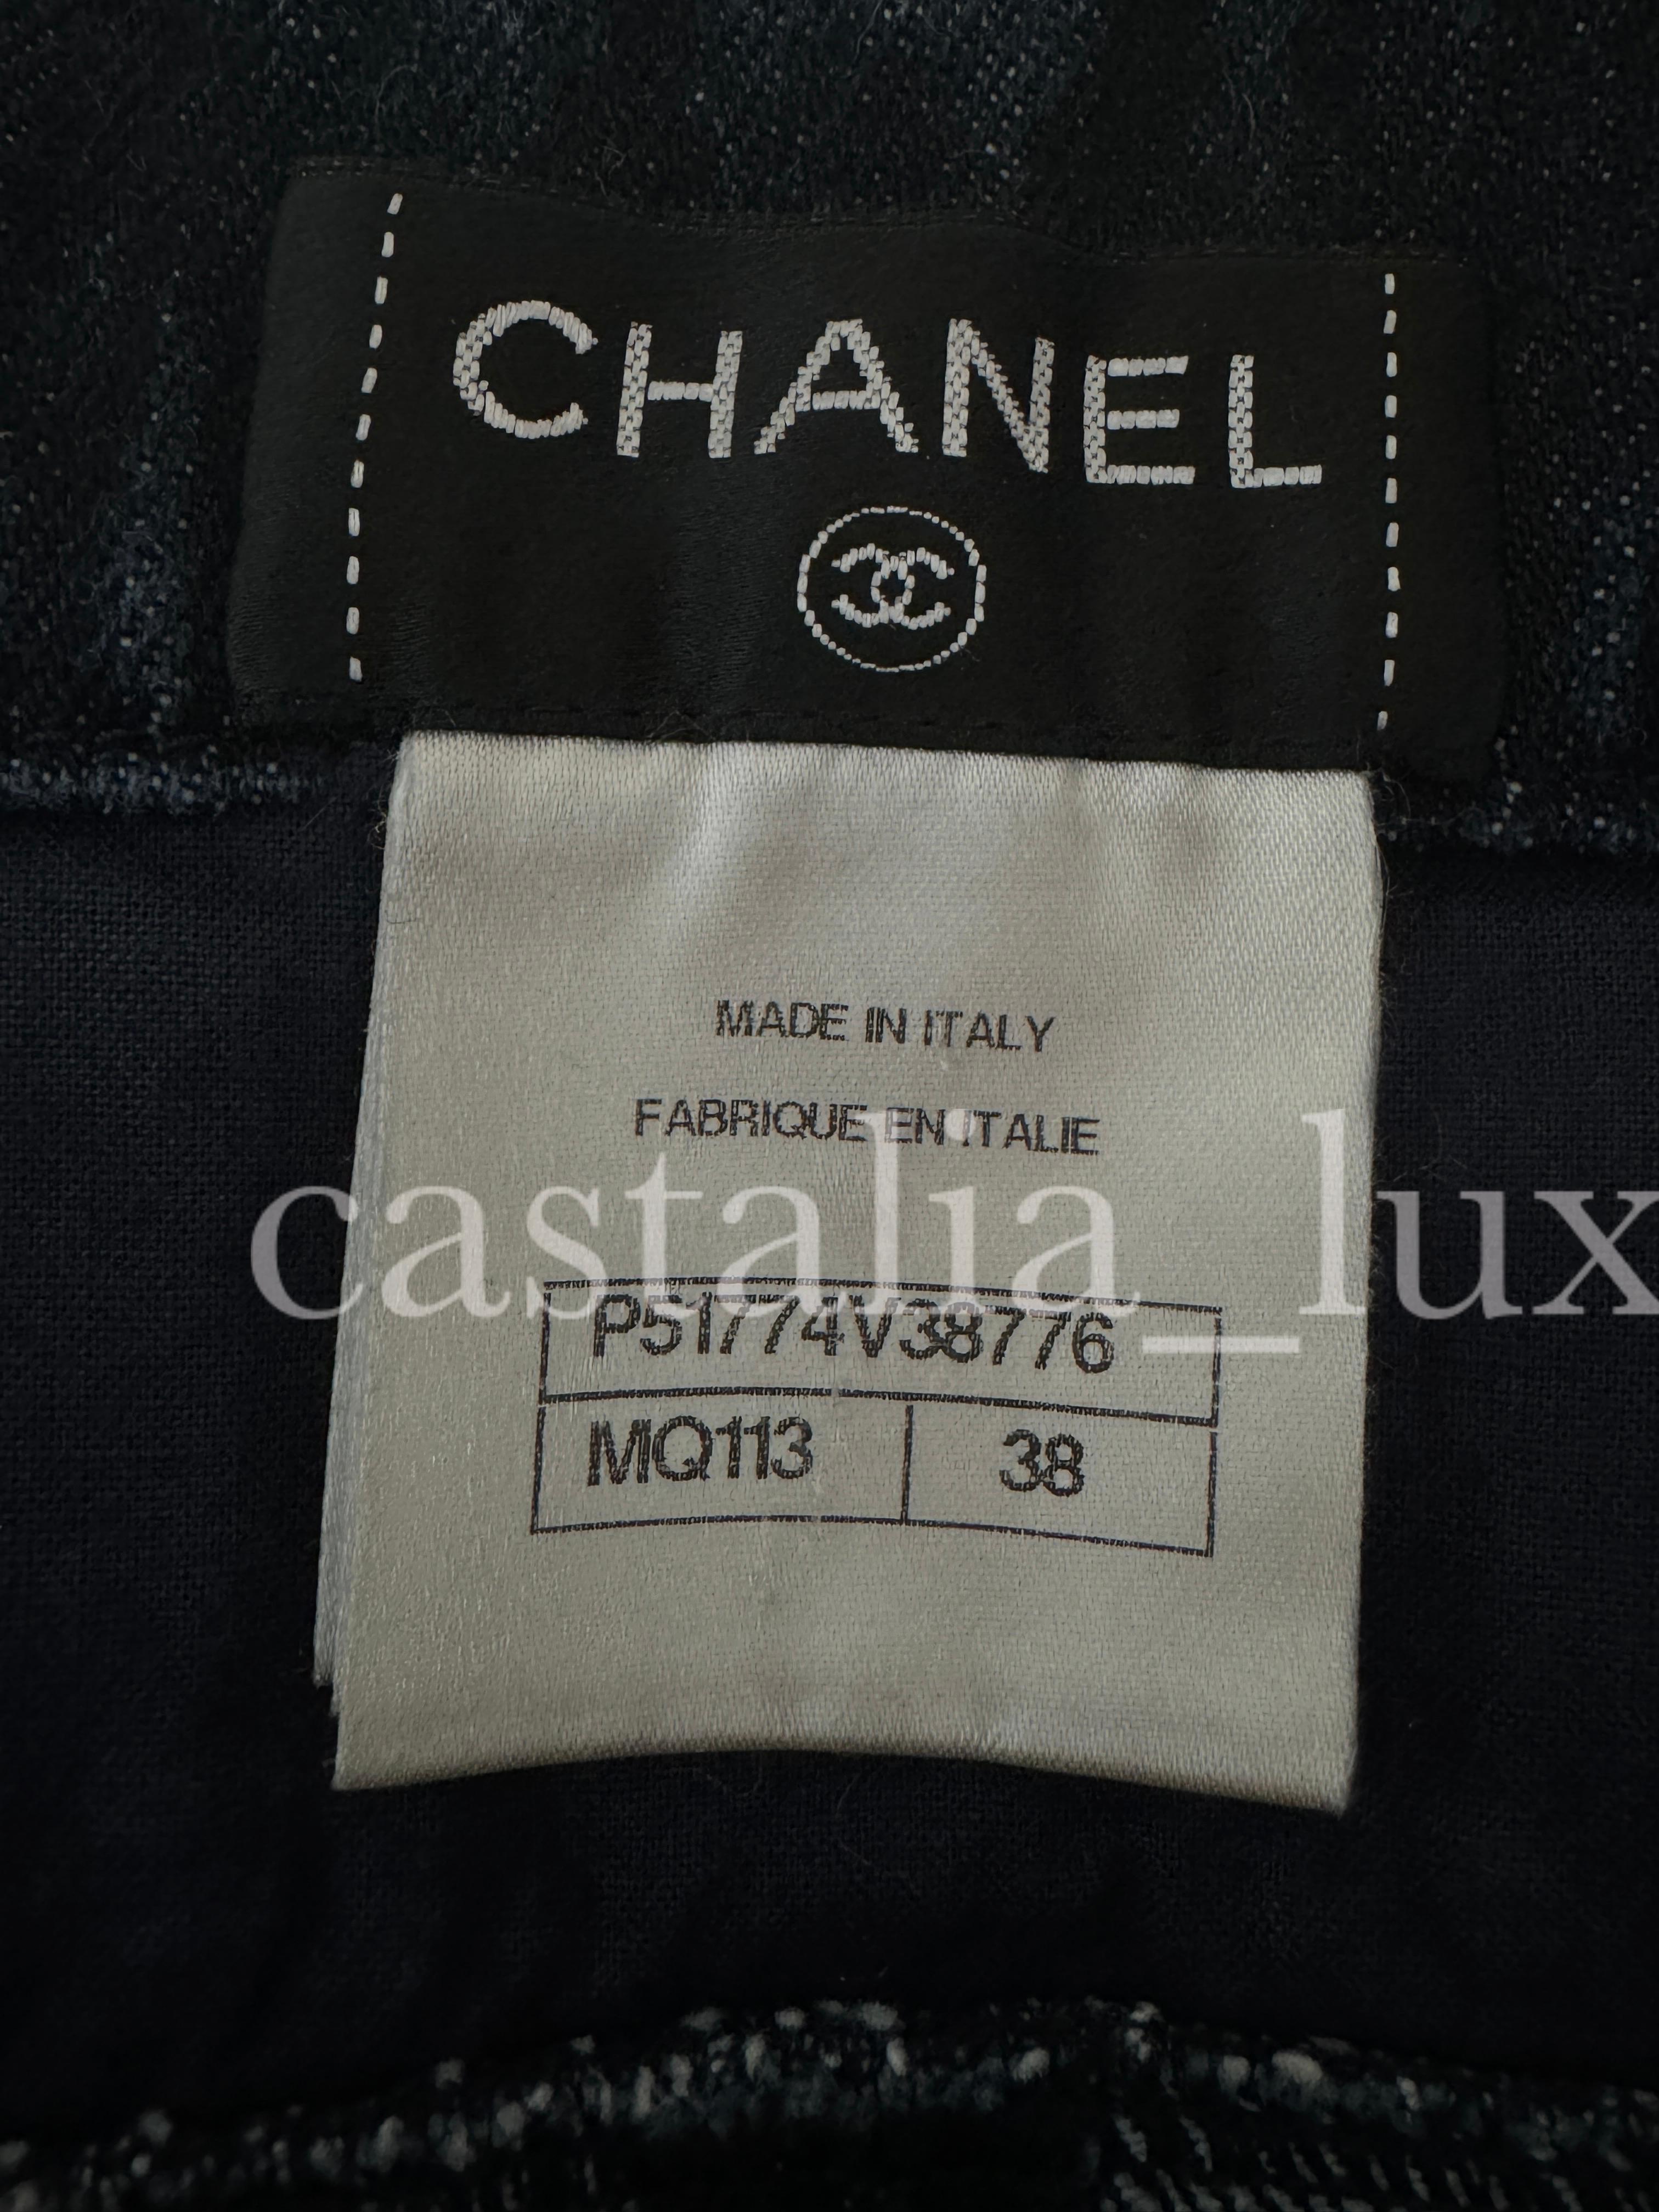 Chanel New Kendall Jenner Style Runway Shorts 8